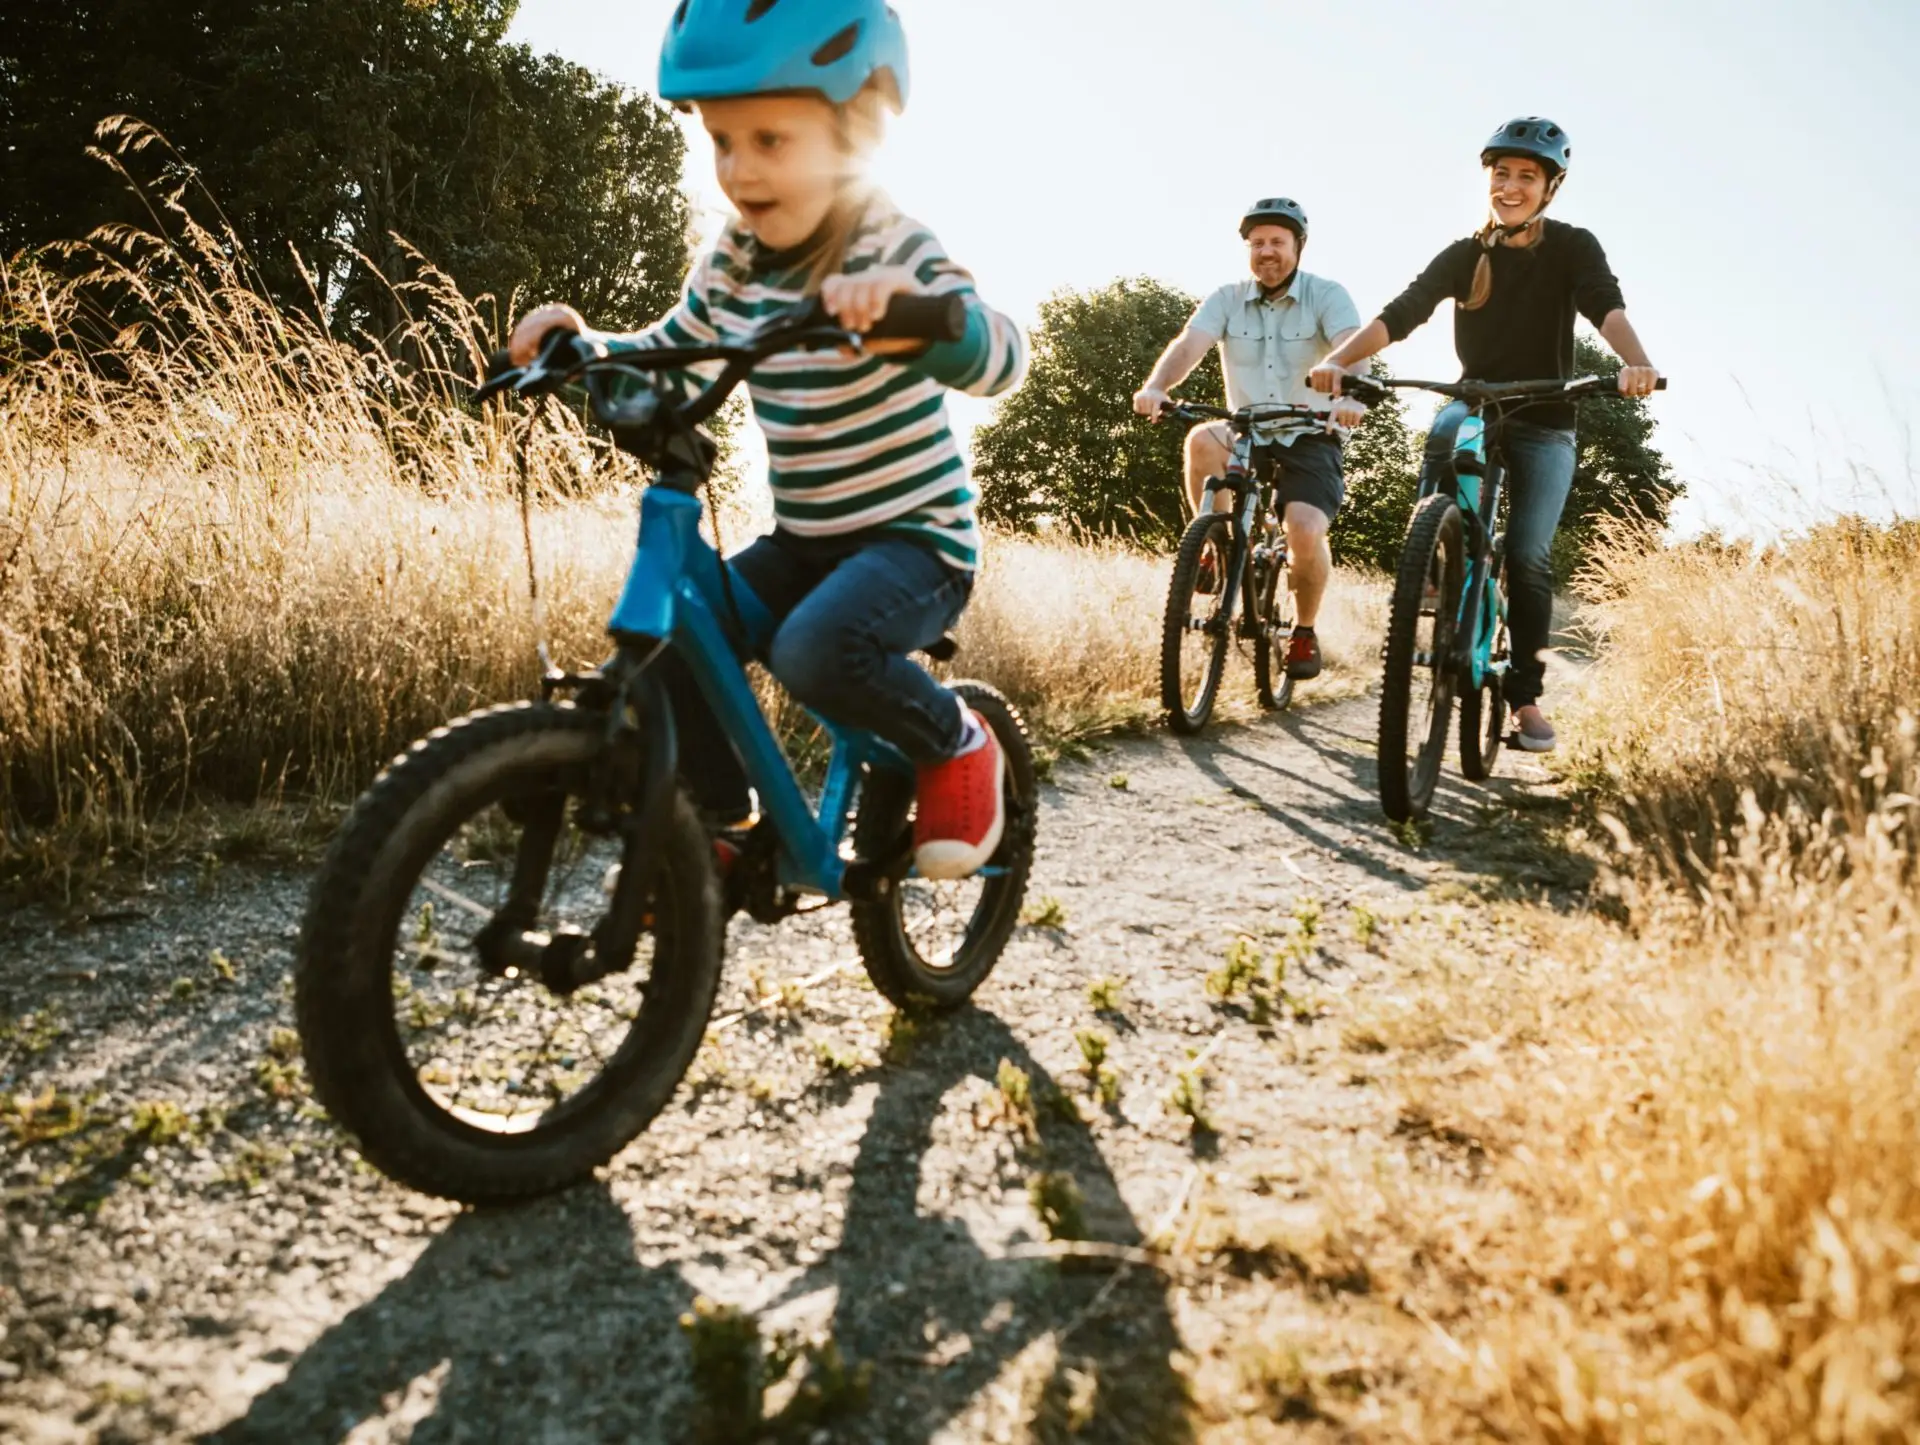 A family of 3 going for a bike ride on a trail